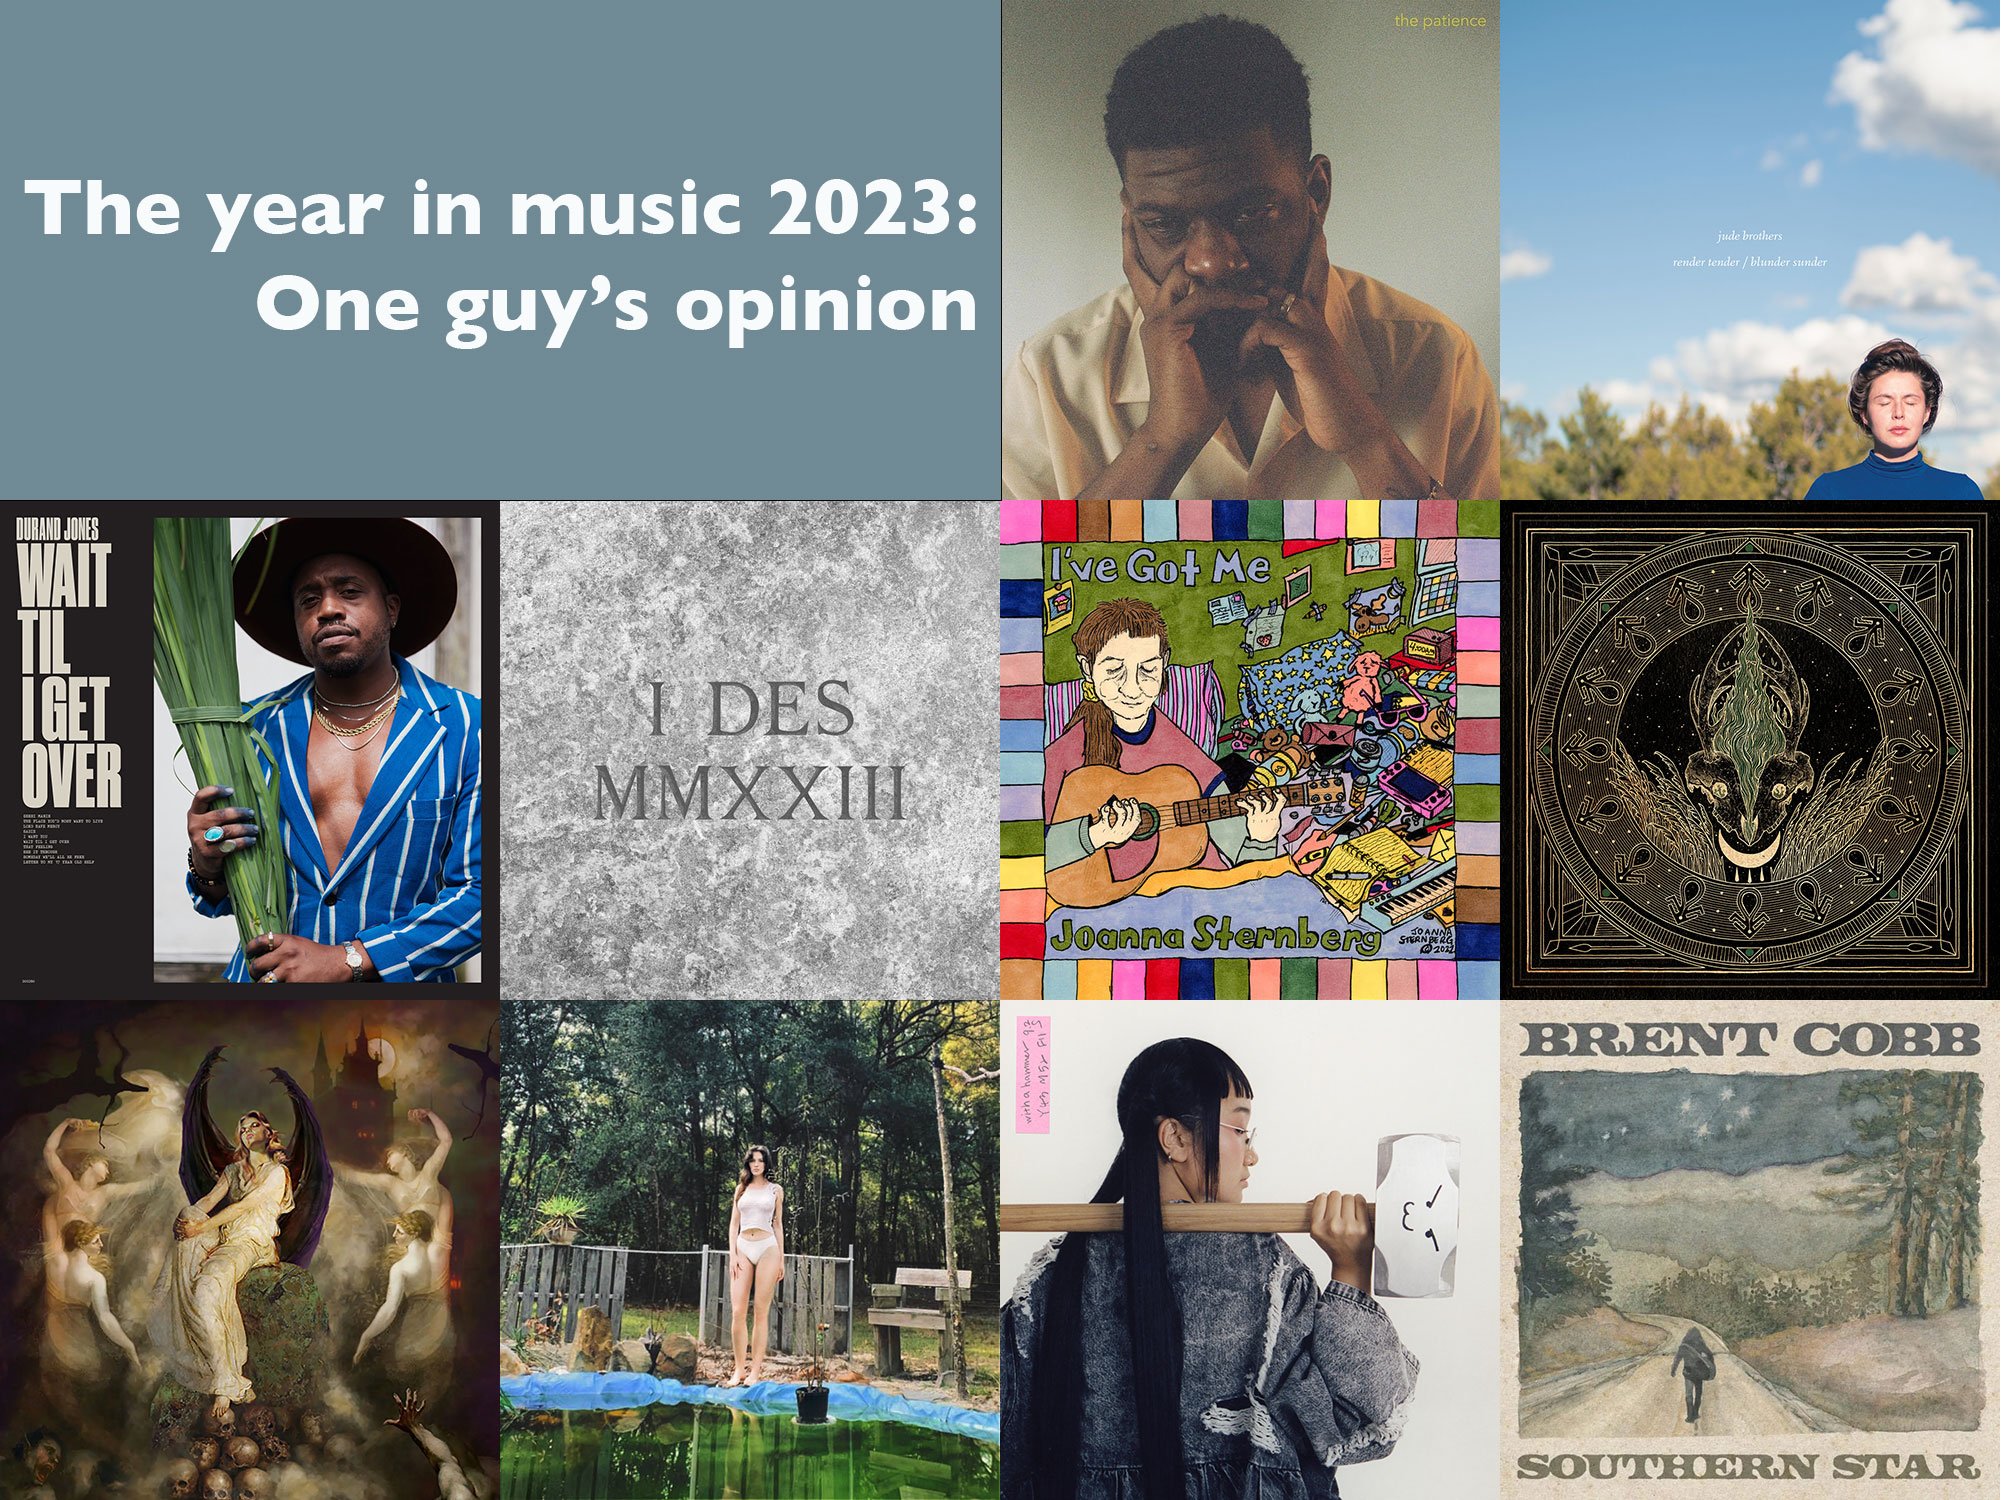 The Year in Music 2023: One guy’s opinion